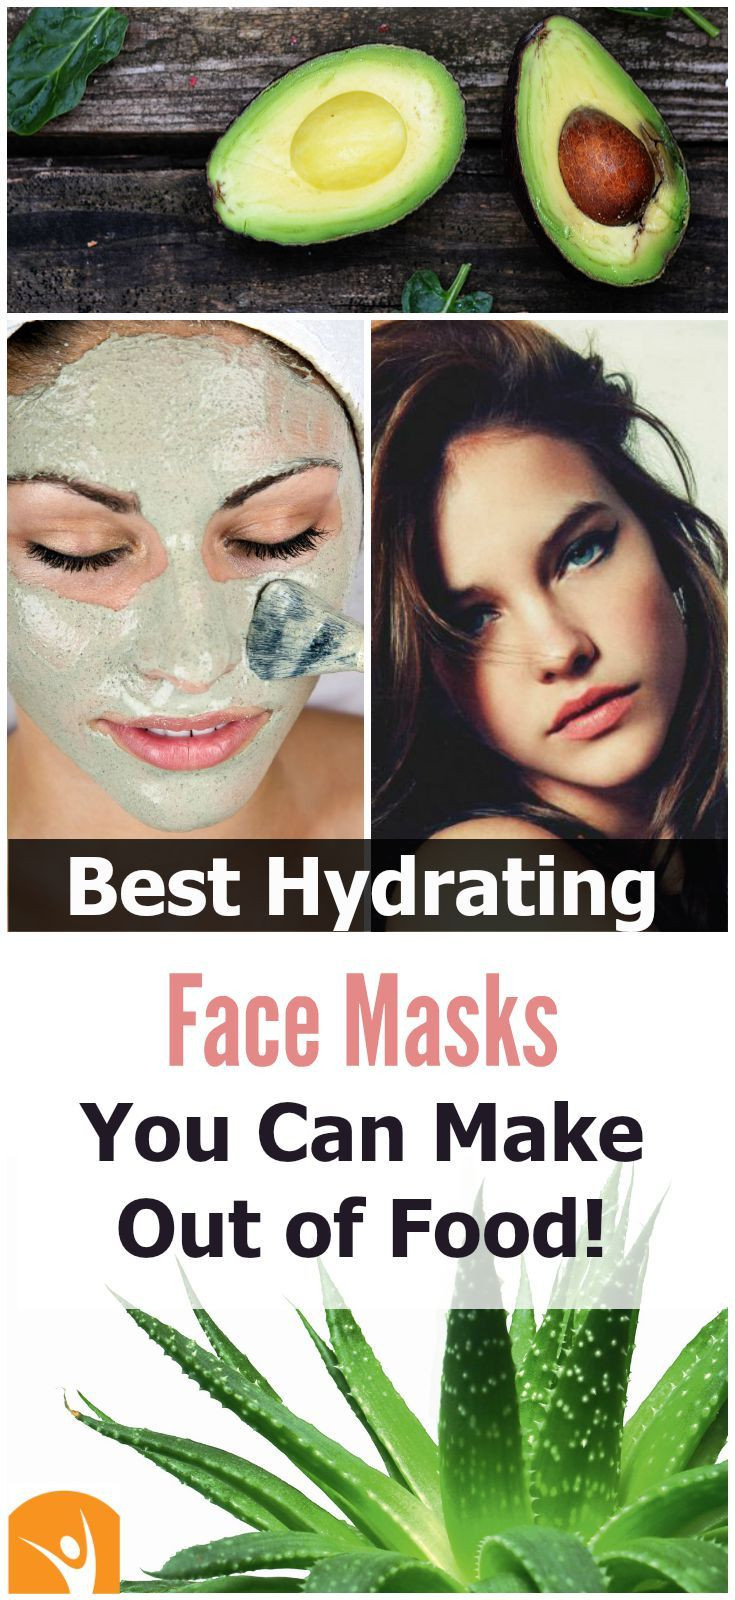 DIY Hydrating Face Mask
 Best Hydrating Face Masks You Can Make out of Food